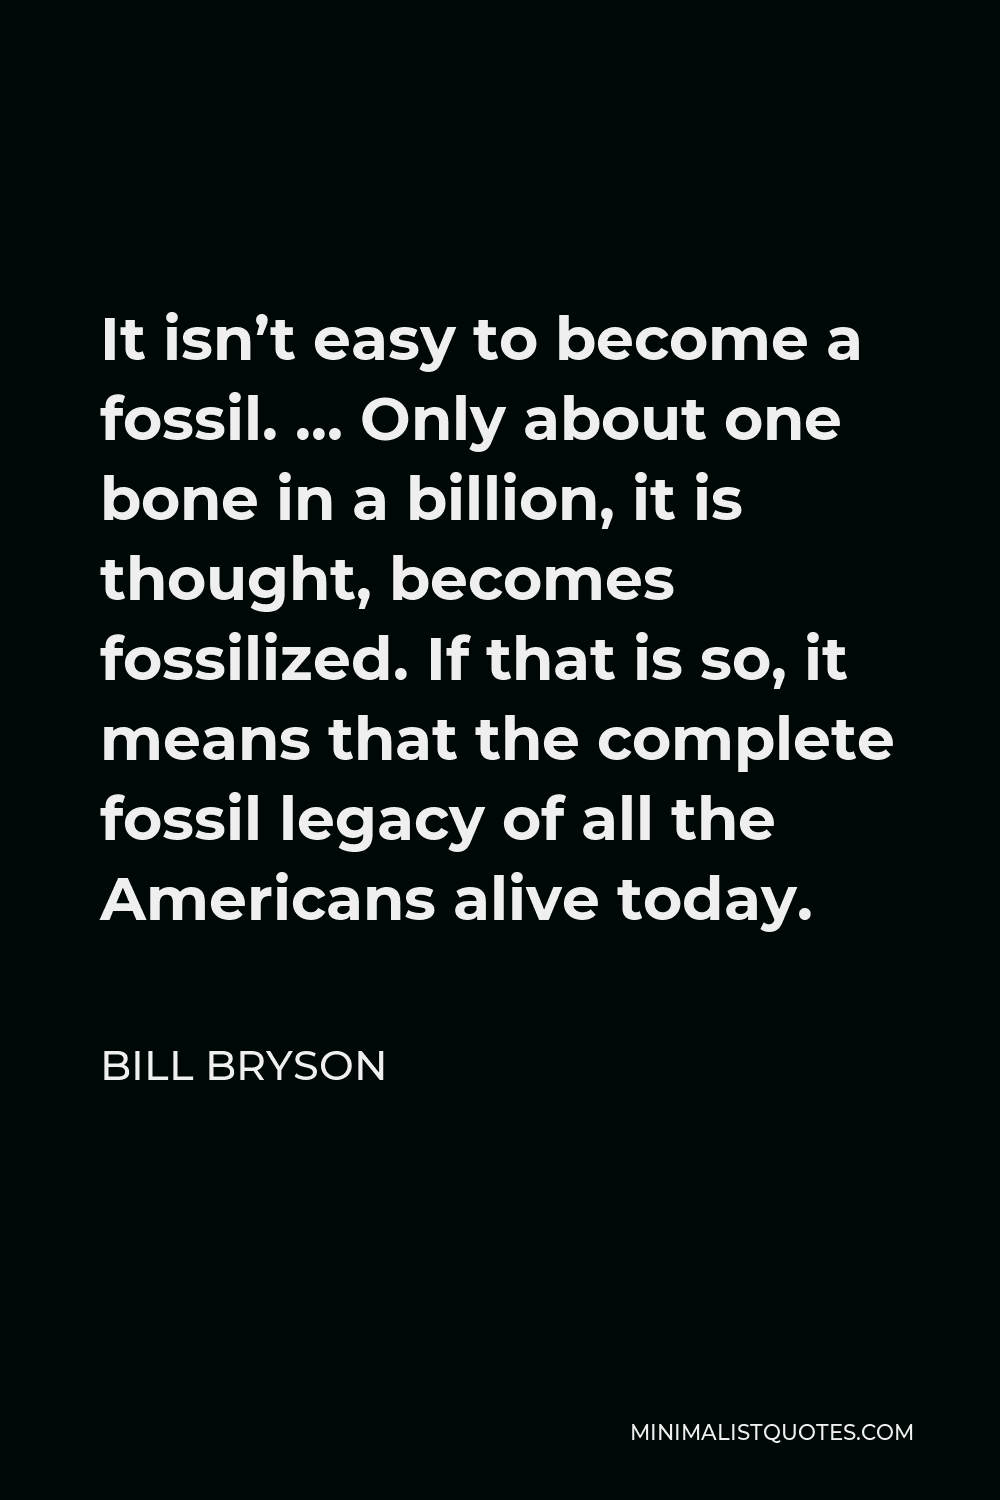 Bill Bryson Quote - It isn’t easy to become a fossil. … Only about one bone in a billion, it is thought, becomes fossilized. If that is so, it means that the complete fossil legacy of all the Americans alive today.